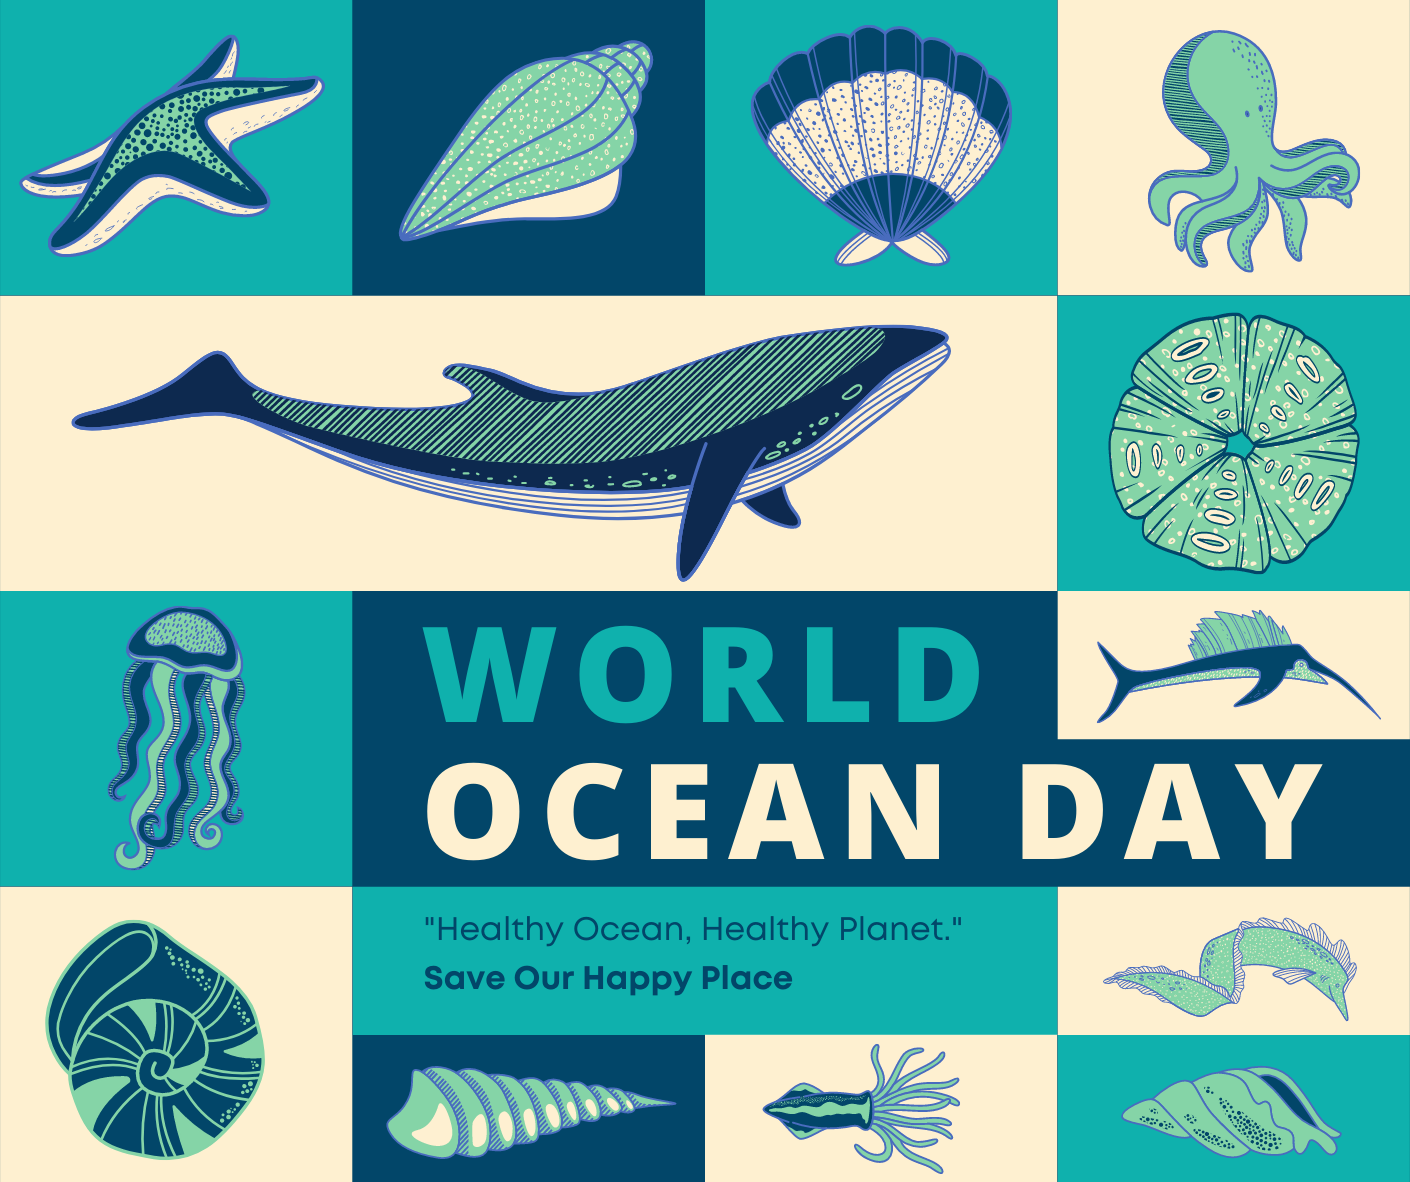 World Ocean Day - "Healthy Ocean, Healthy Planet." Save Our Happy Place